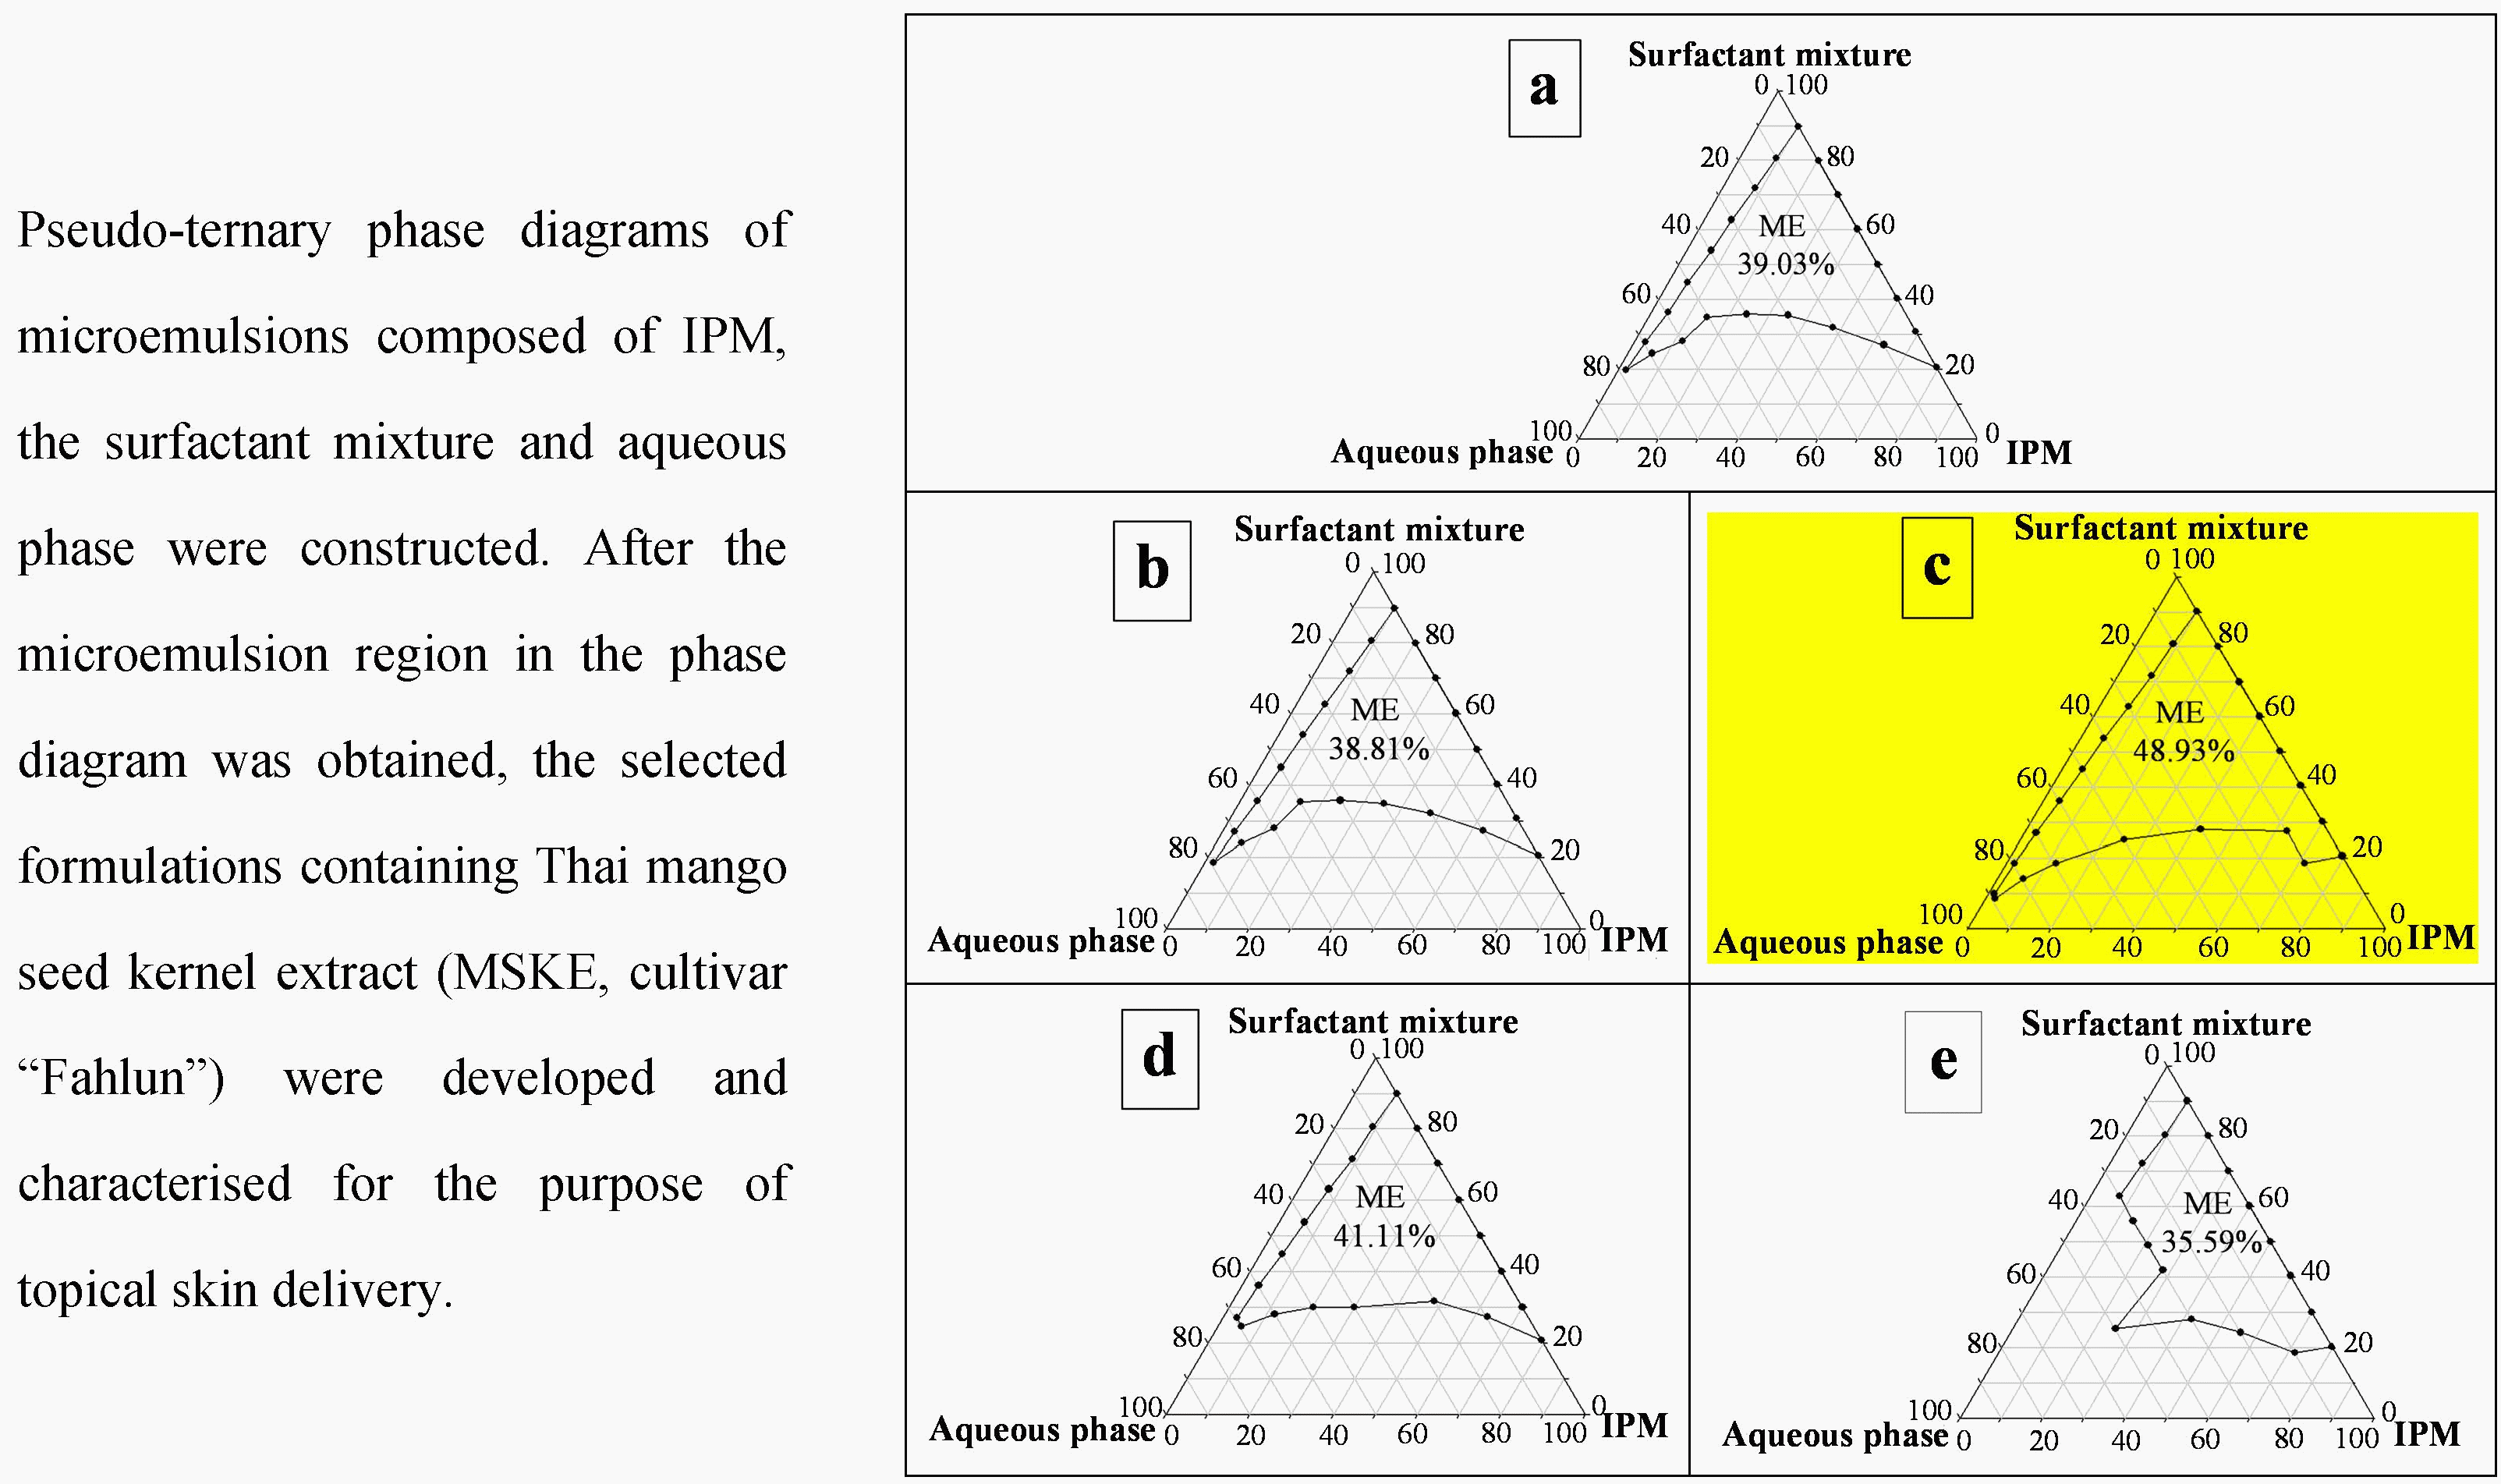 Pseudoternary phase diagrams of (a) oil (isopropyl myristate